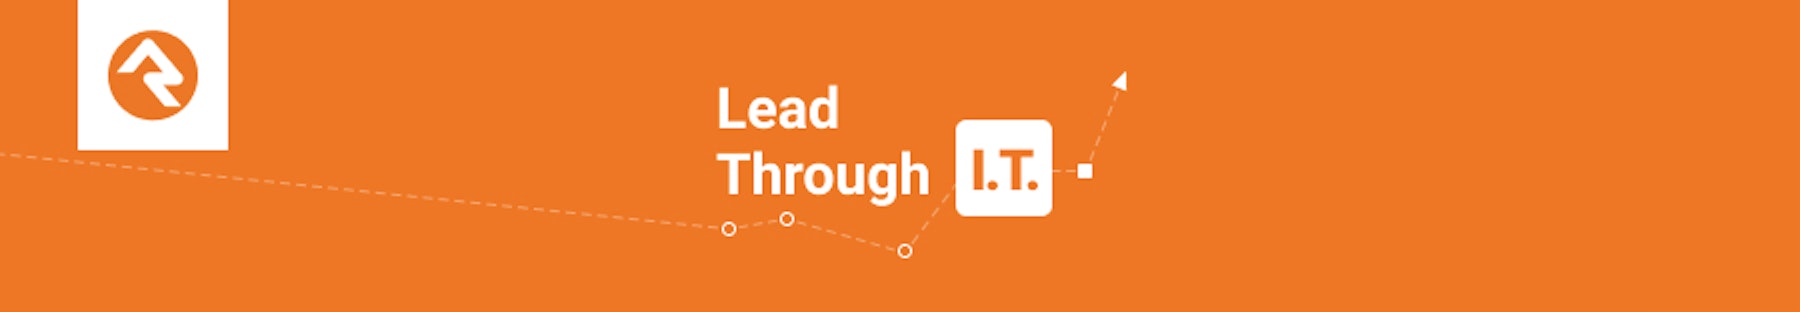 Podcast Episode 87: Lead Through It Live Panel